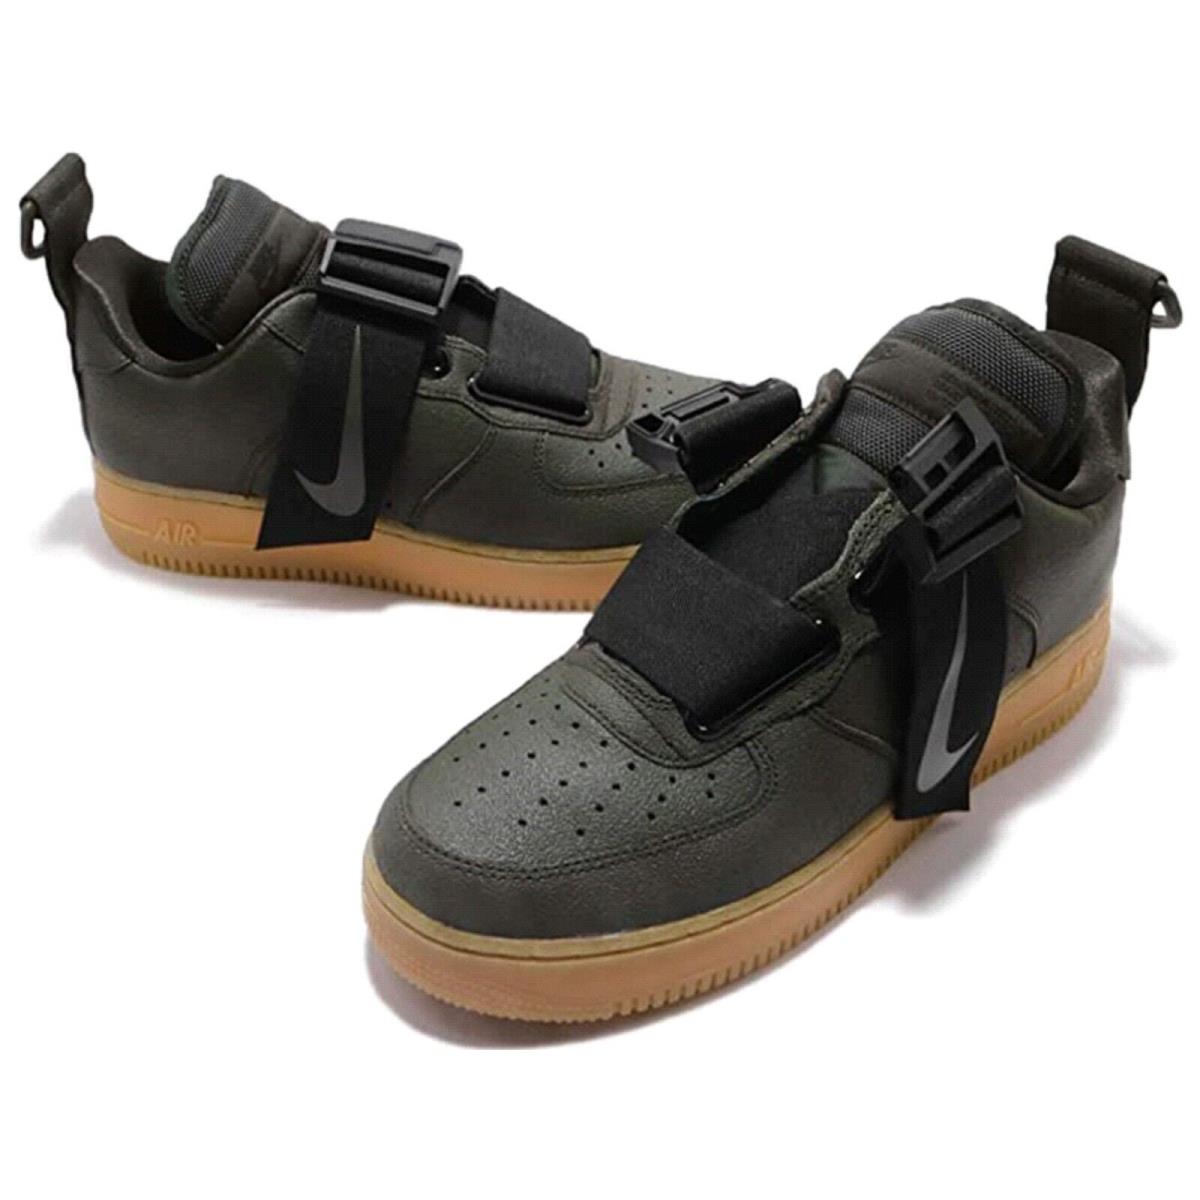 Nike Air Force 1 Low Utility Premium Men`s Shoes with Box